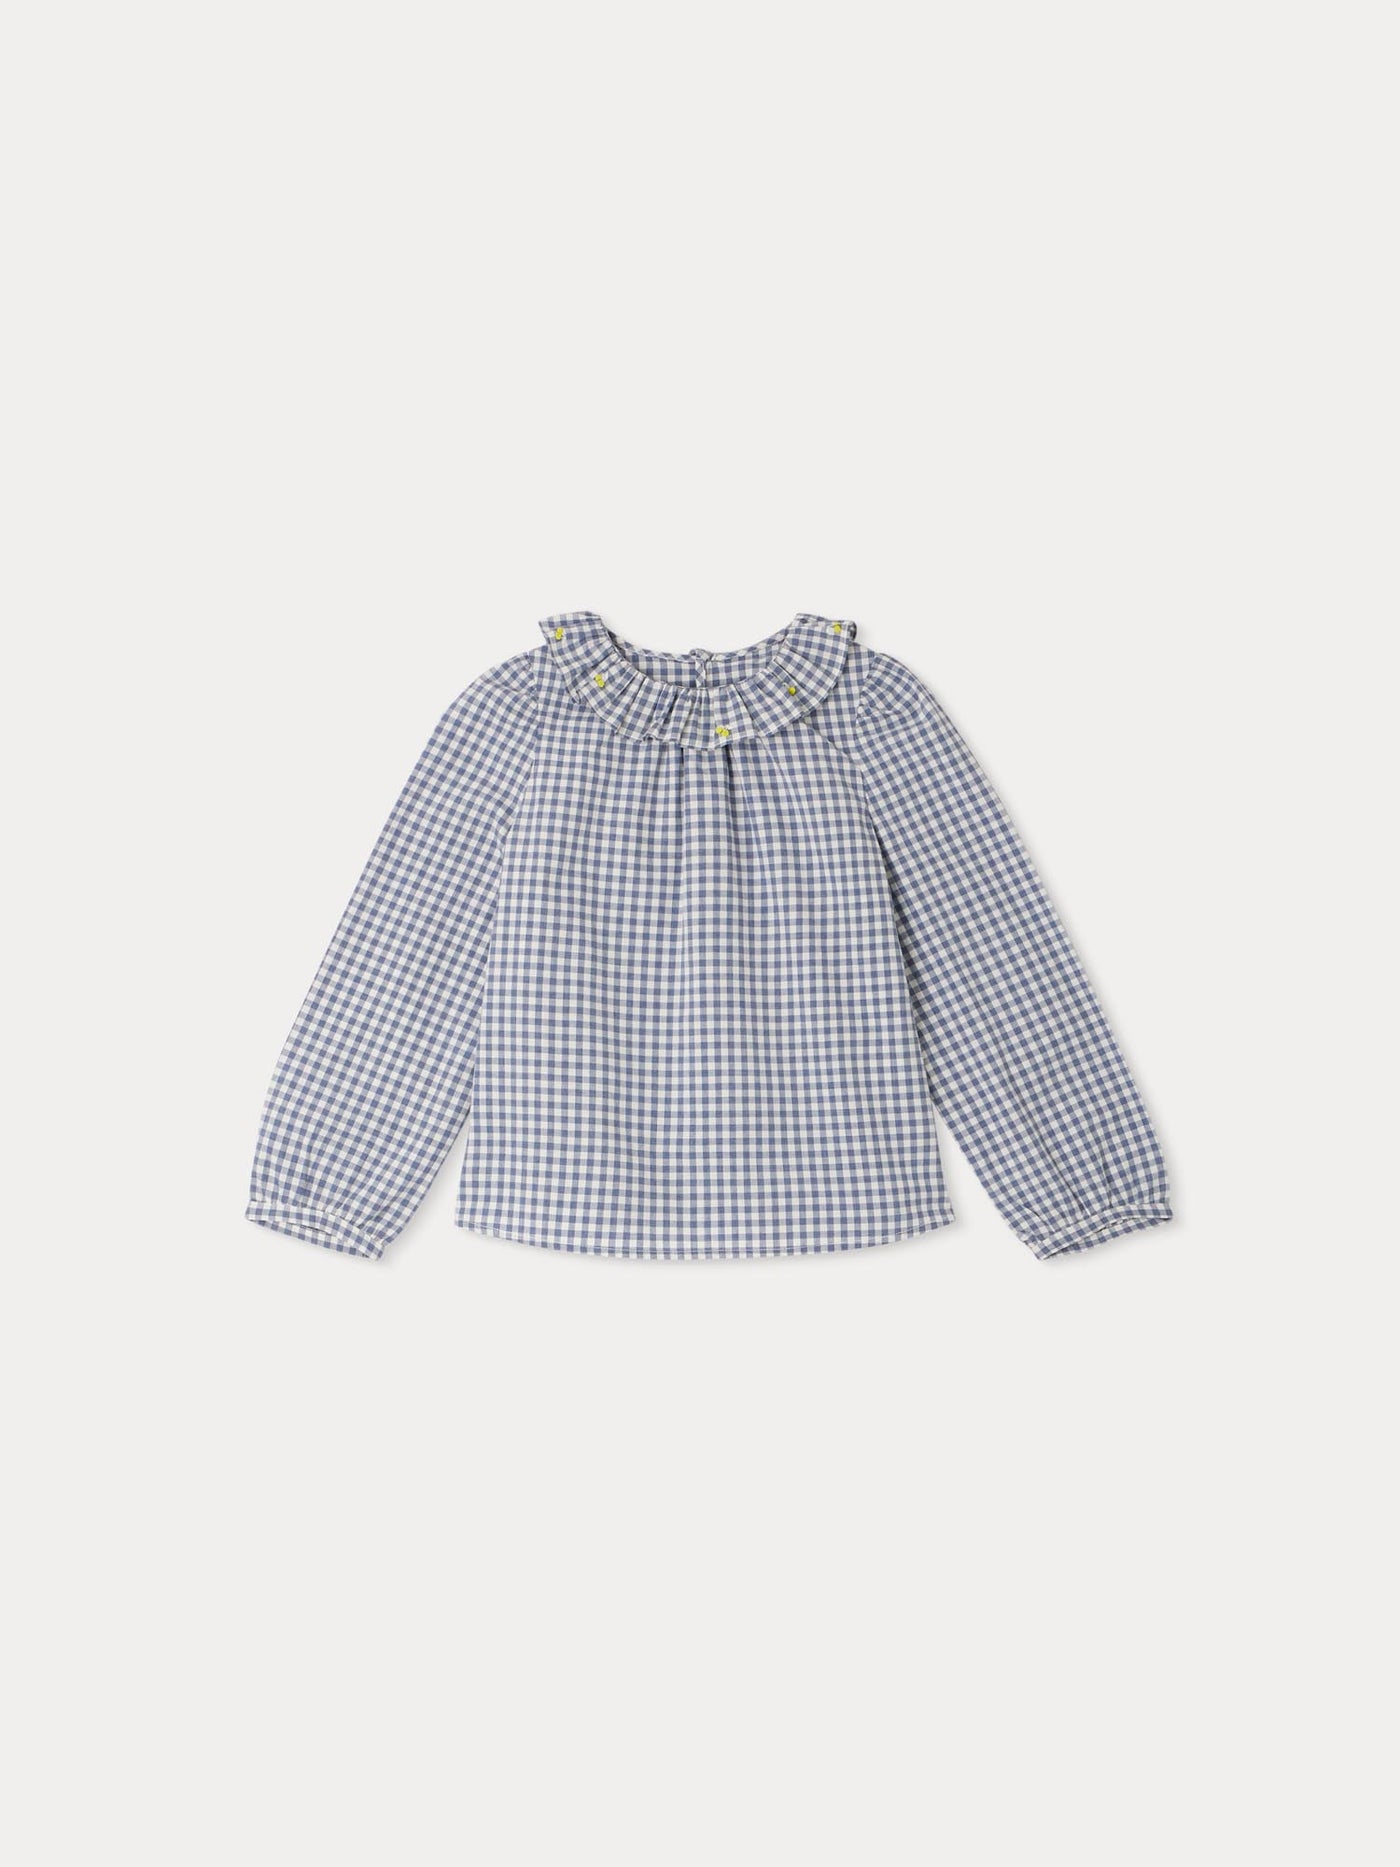 Timber checkered embroidered blouse